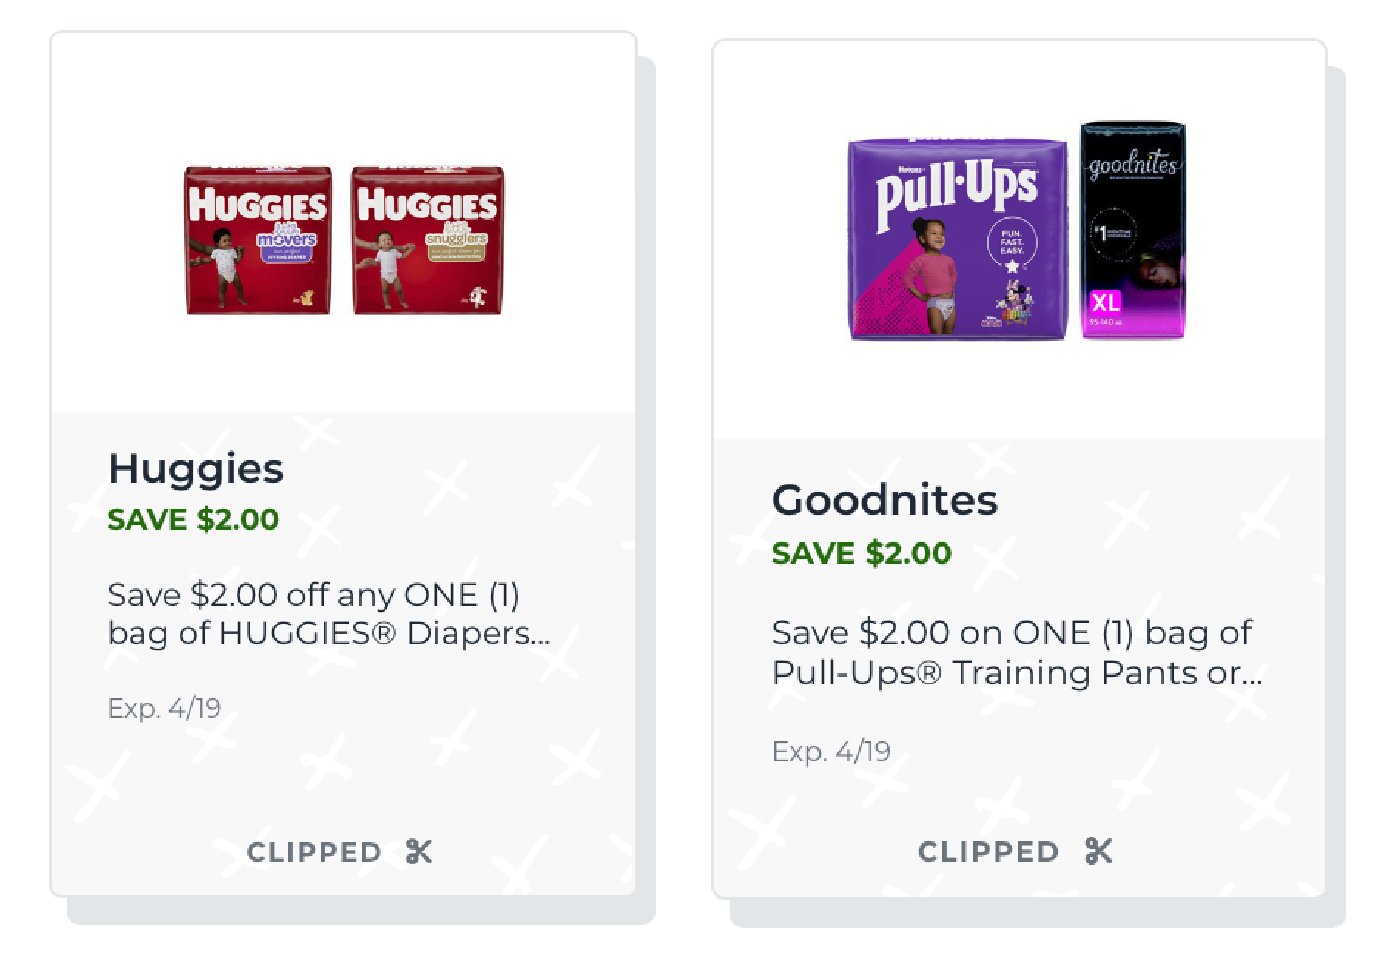 Can't-Miss Deal On Huggies Diapers And Pull-Ups This Week At Publix - Diapers As Low As $2.99! on I Heart Publix